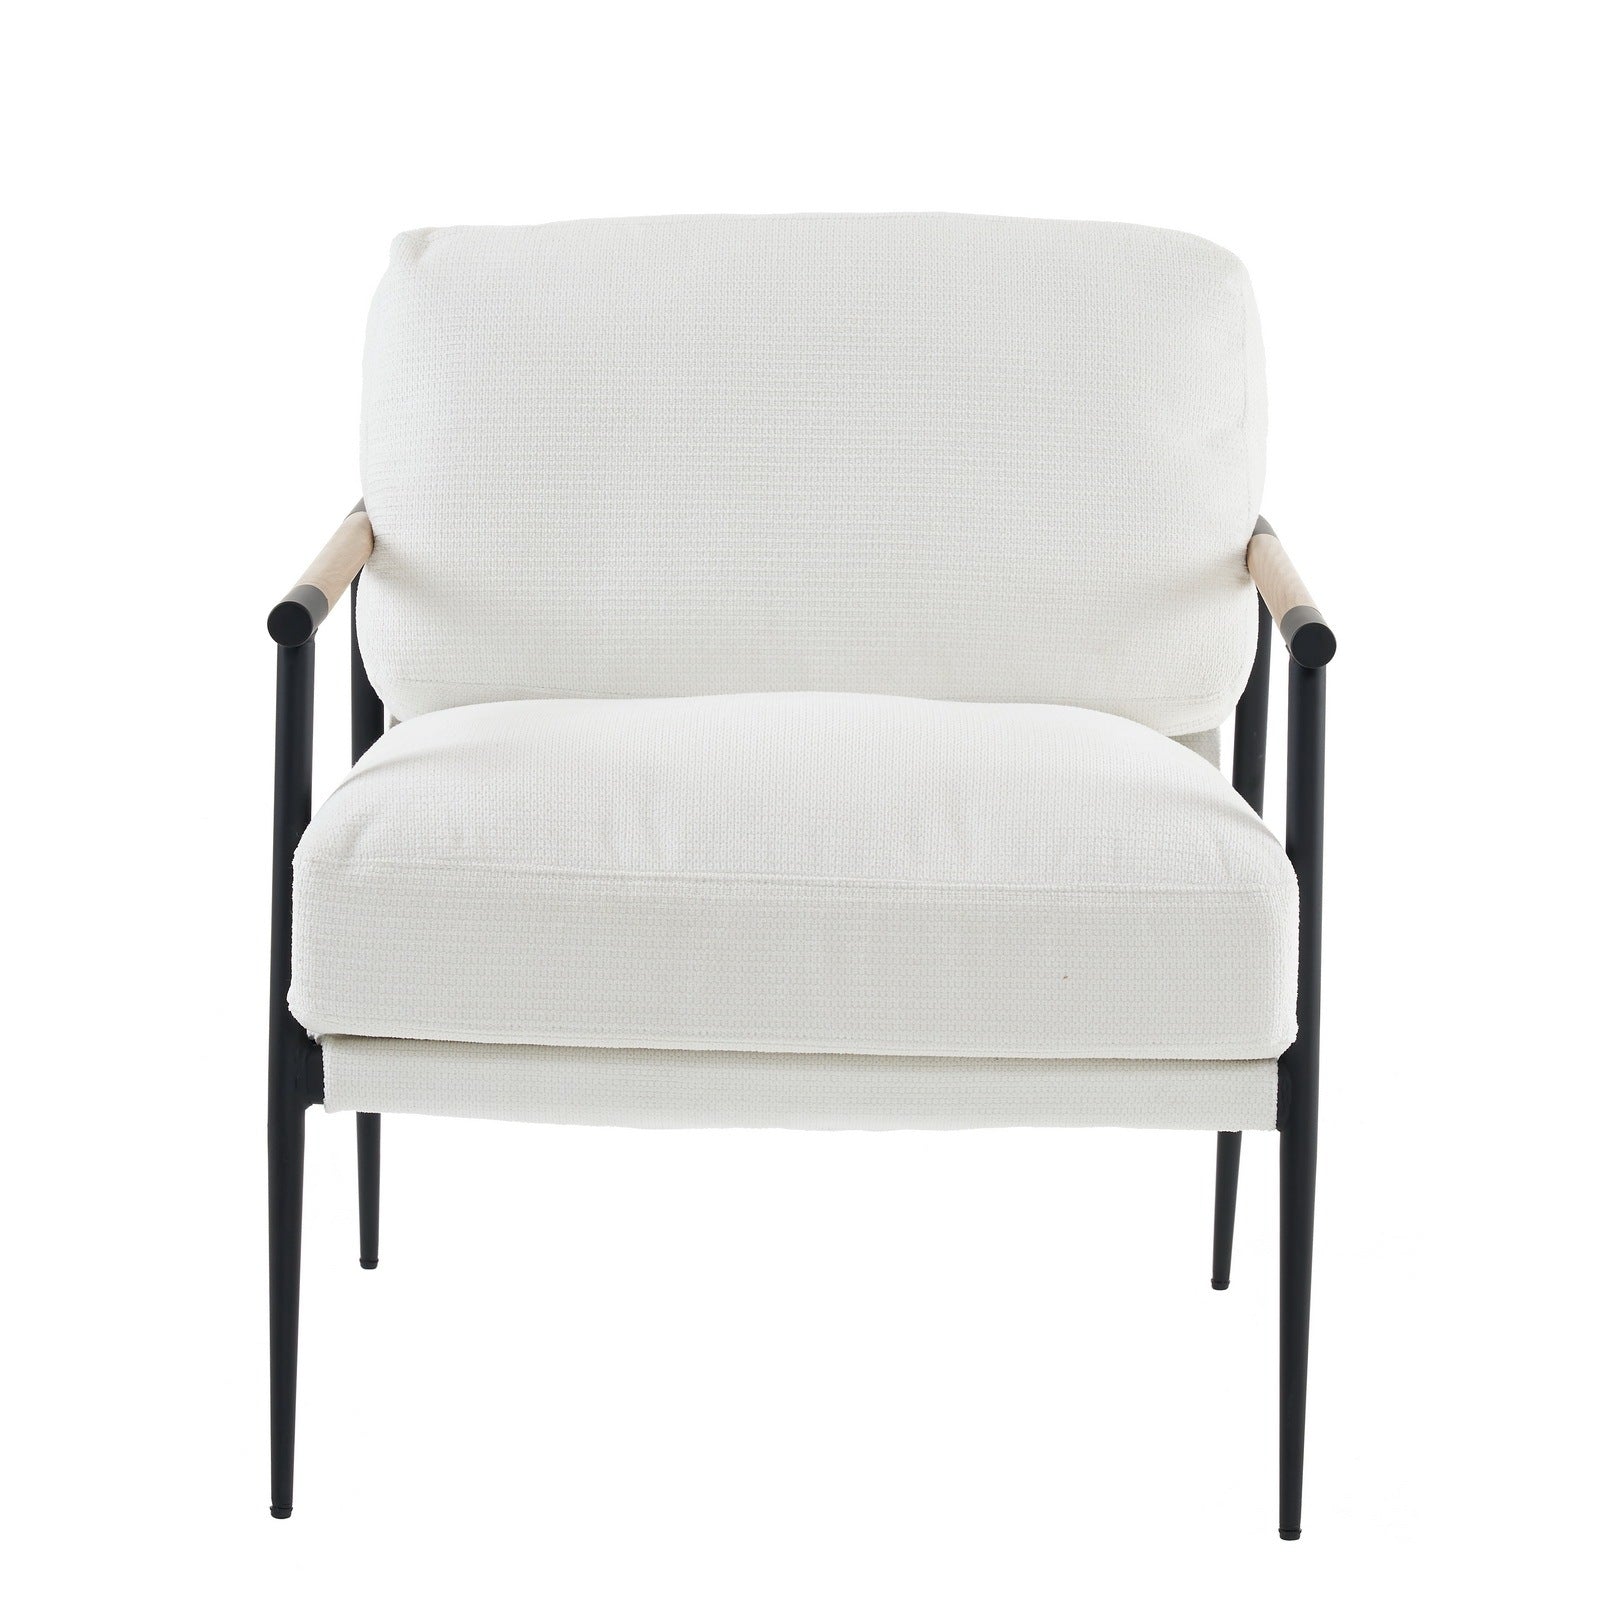 Leisure chair lounge chair velvet White color white-fabric